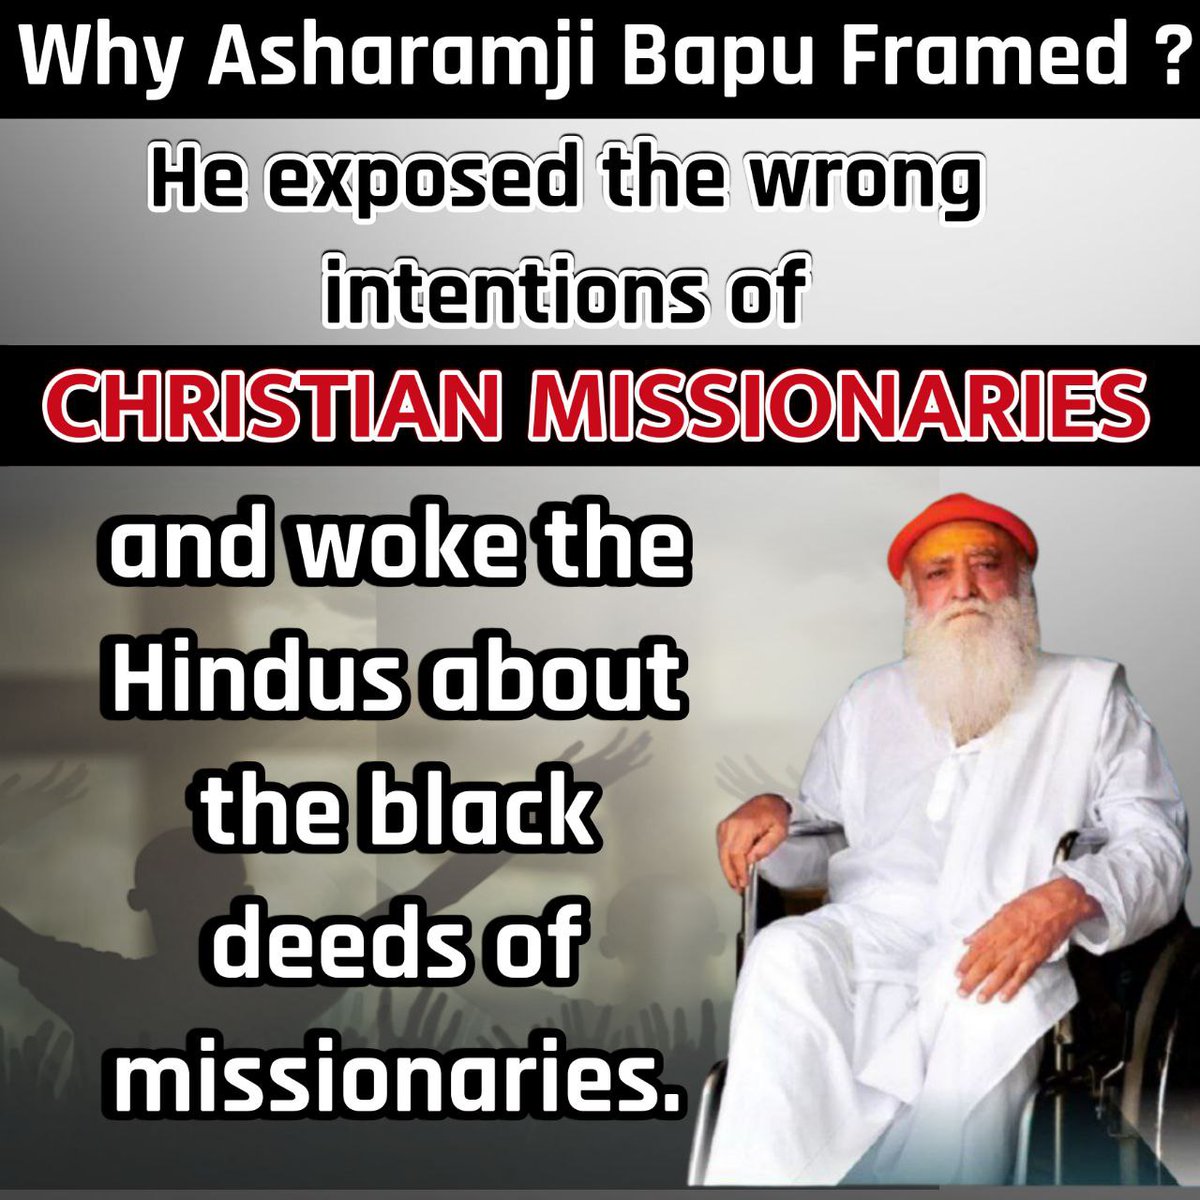 @10Annya @janvisikri83 @MeghaRede3 Asaram Bapu Case
Conspiracy Against Hinduism
Voice Of The People
#InnocentBehindBars He put a full stop to their dirty job, that's why he was framed